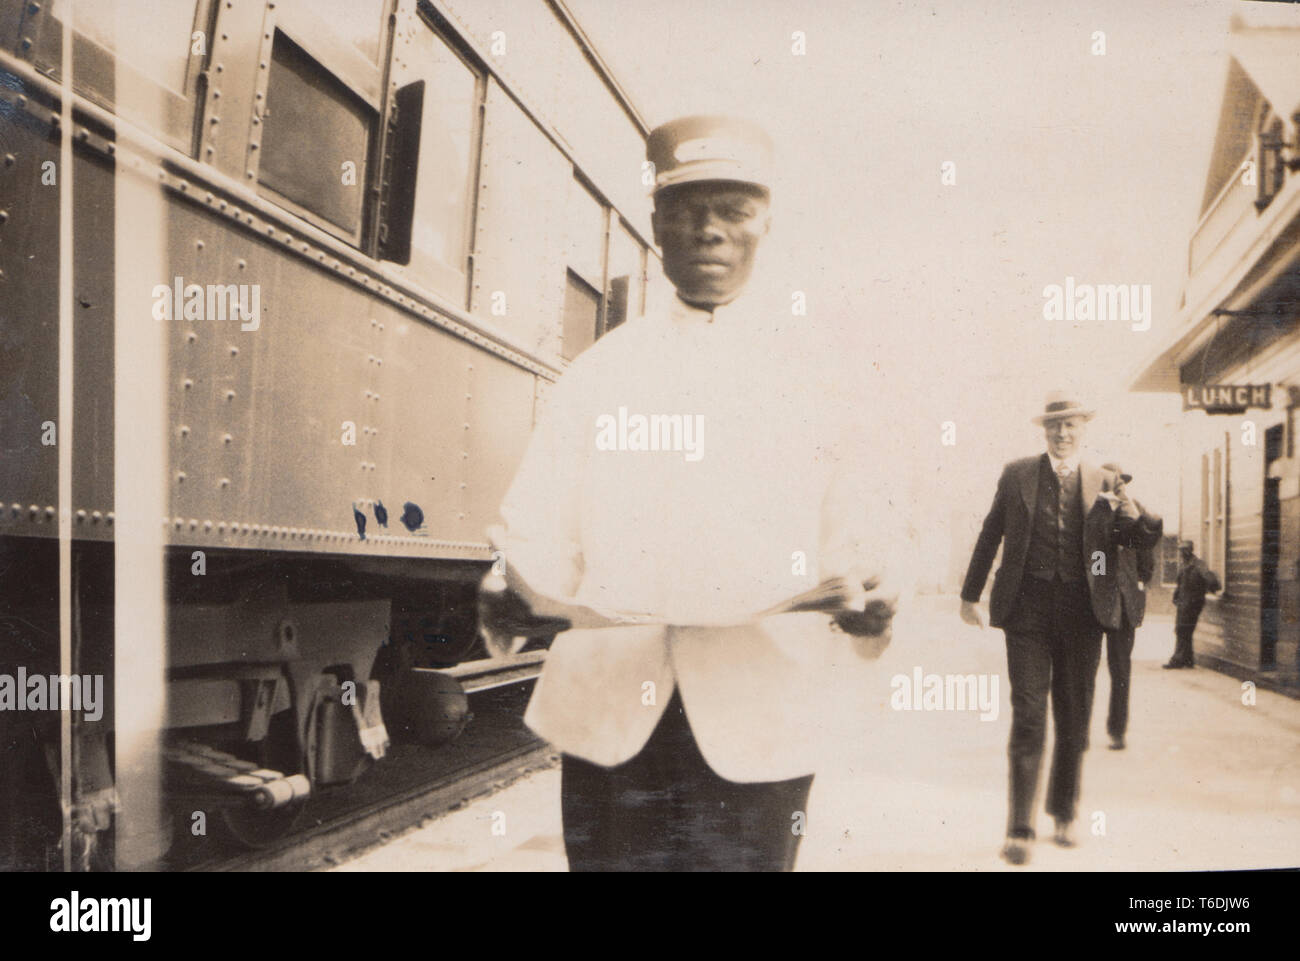 A Canadian Railways Train Attendant on The Platform of a Train Station in Canada. Stock Photo